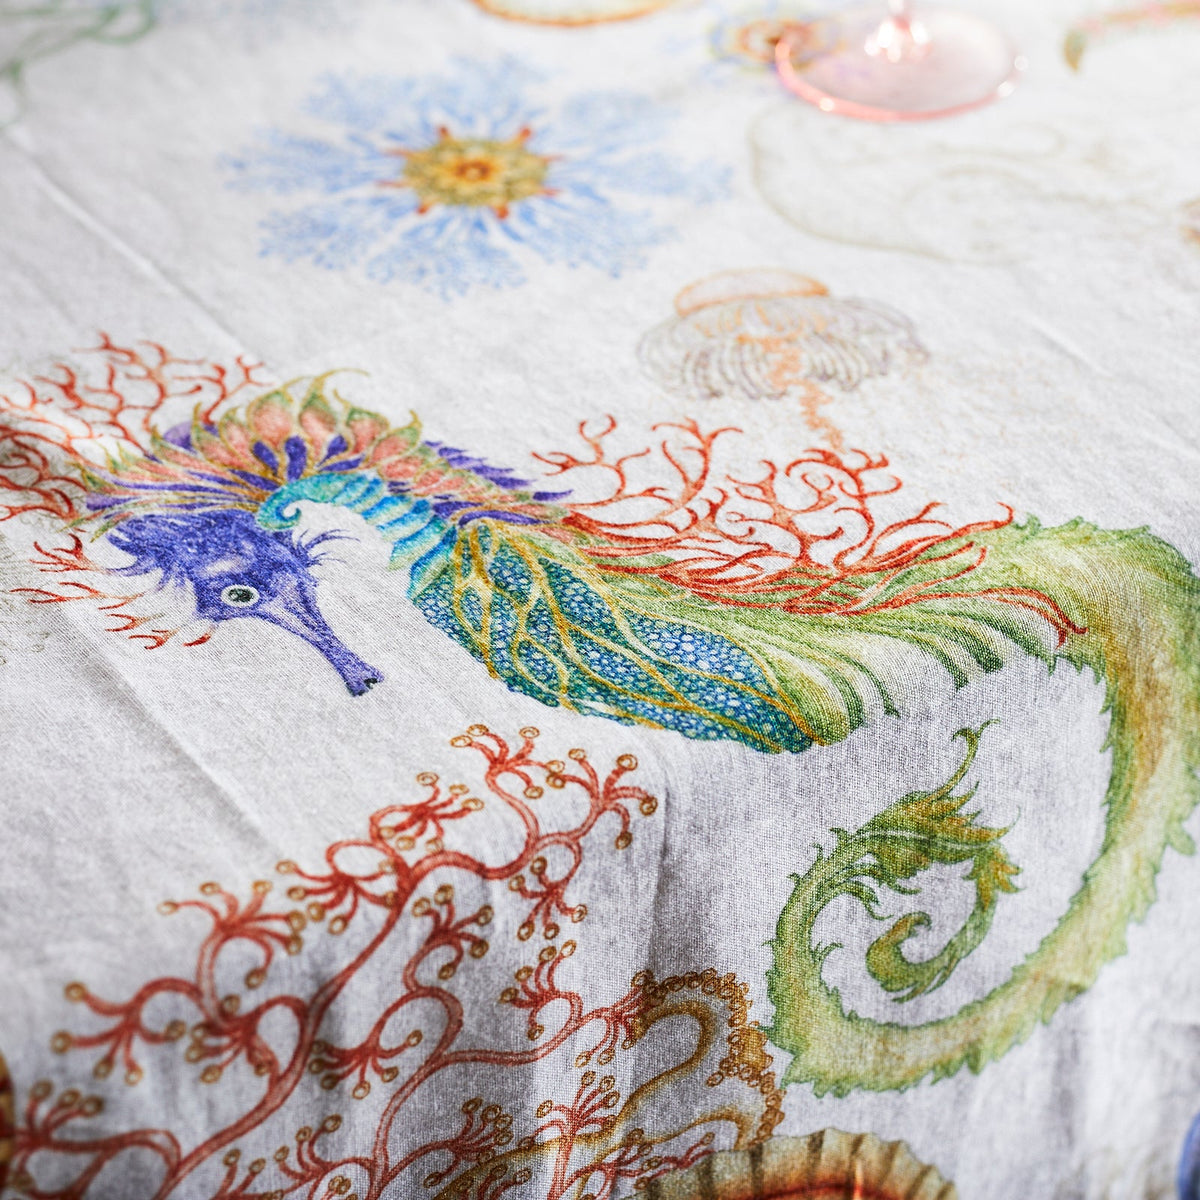 Seahorse Detail from the Reef Linen Tablecloth featuring watercolor Shells, Jellyfish, Coral, Seahorses from Caskata